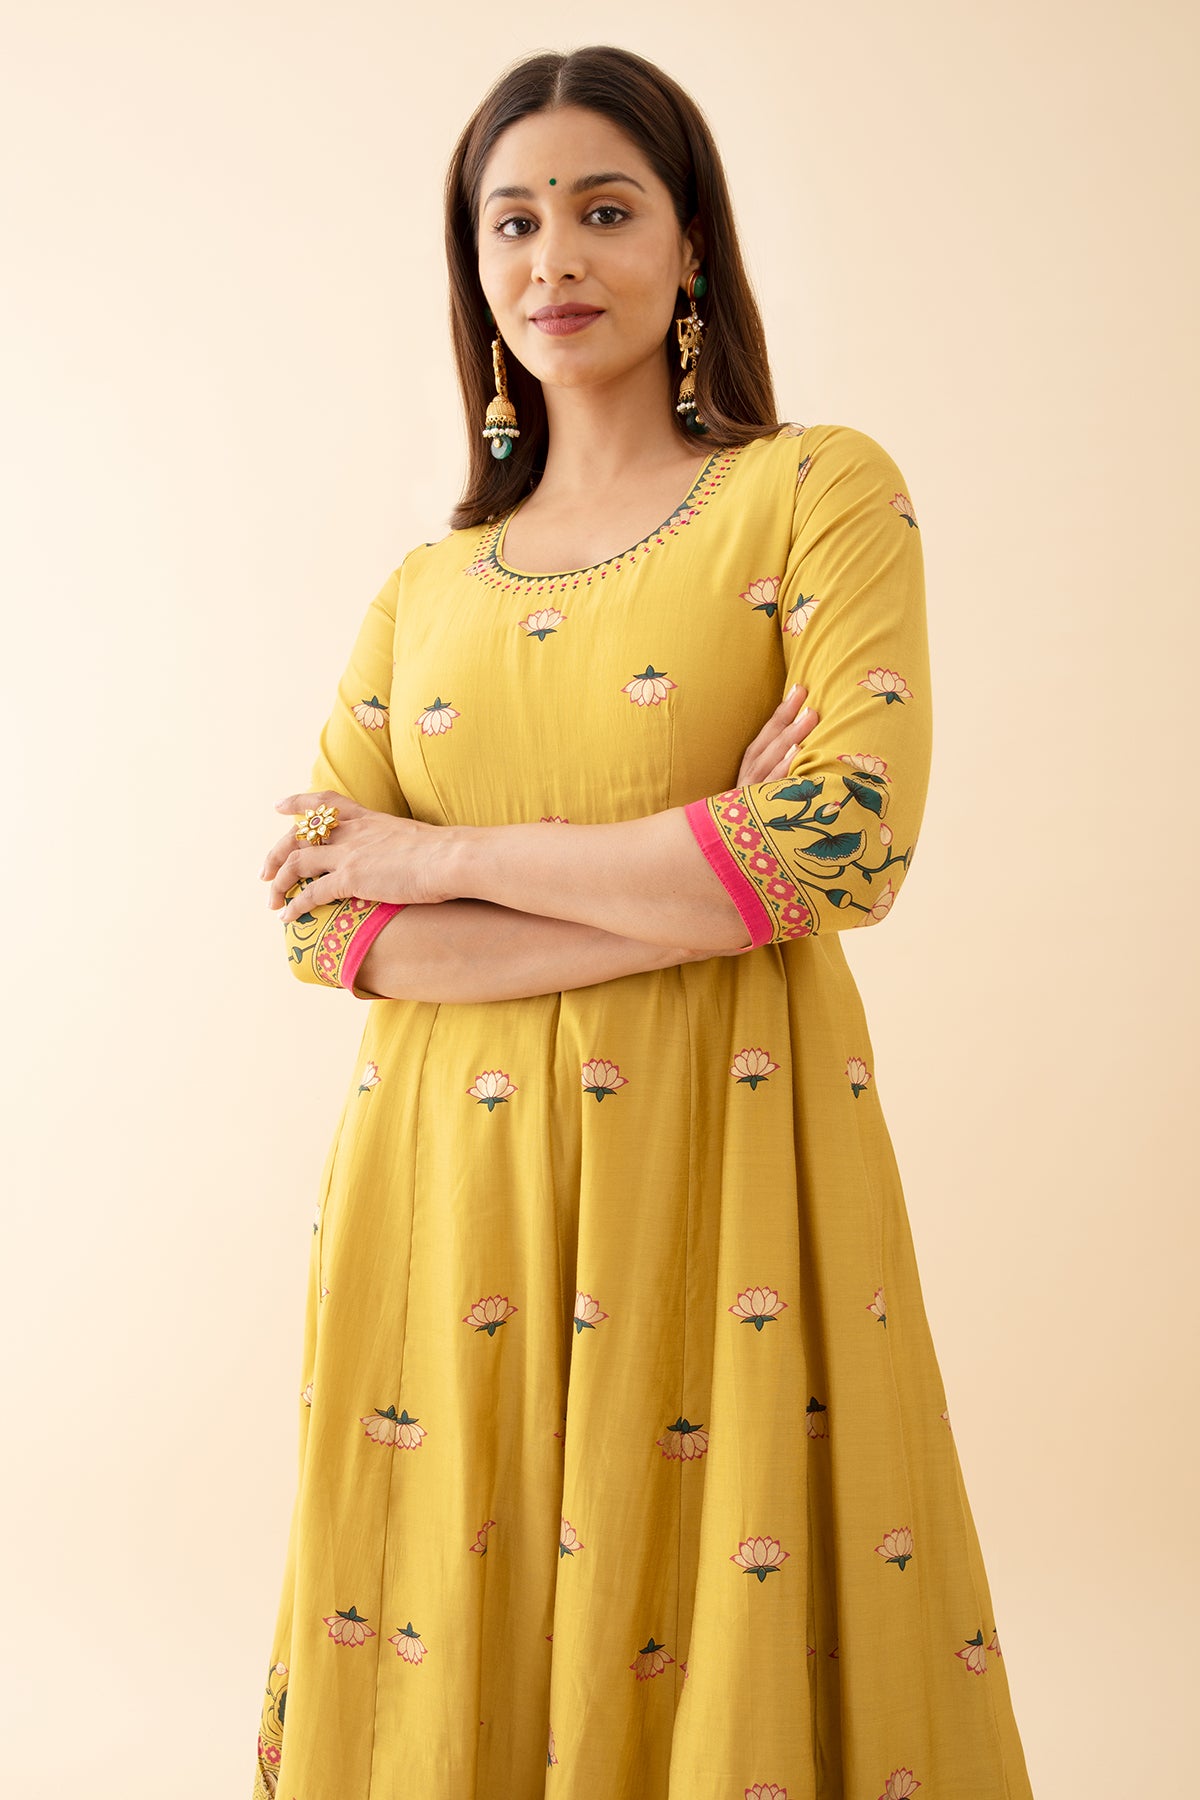 Louts Motif Printed Anarkali with Embroidered Neckline - Yellow